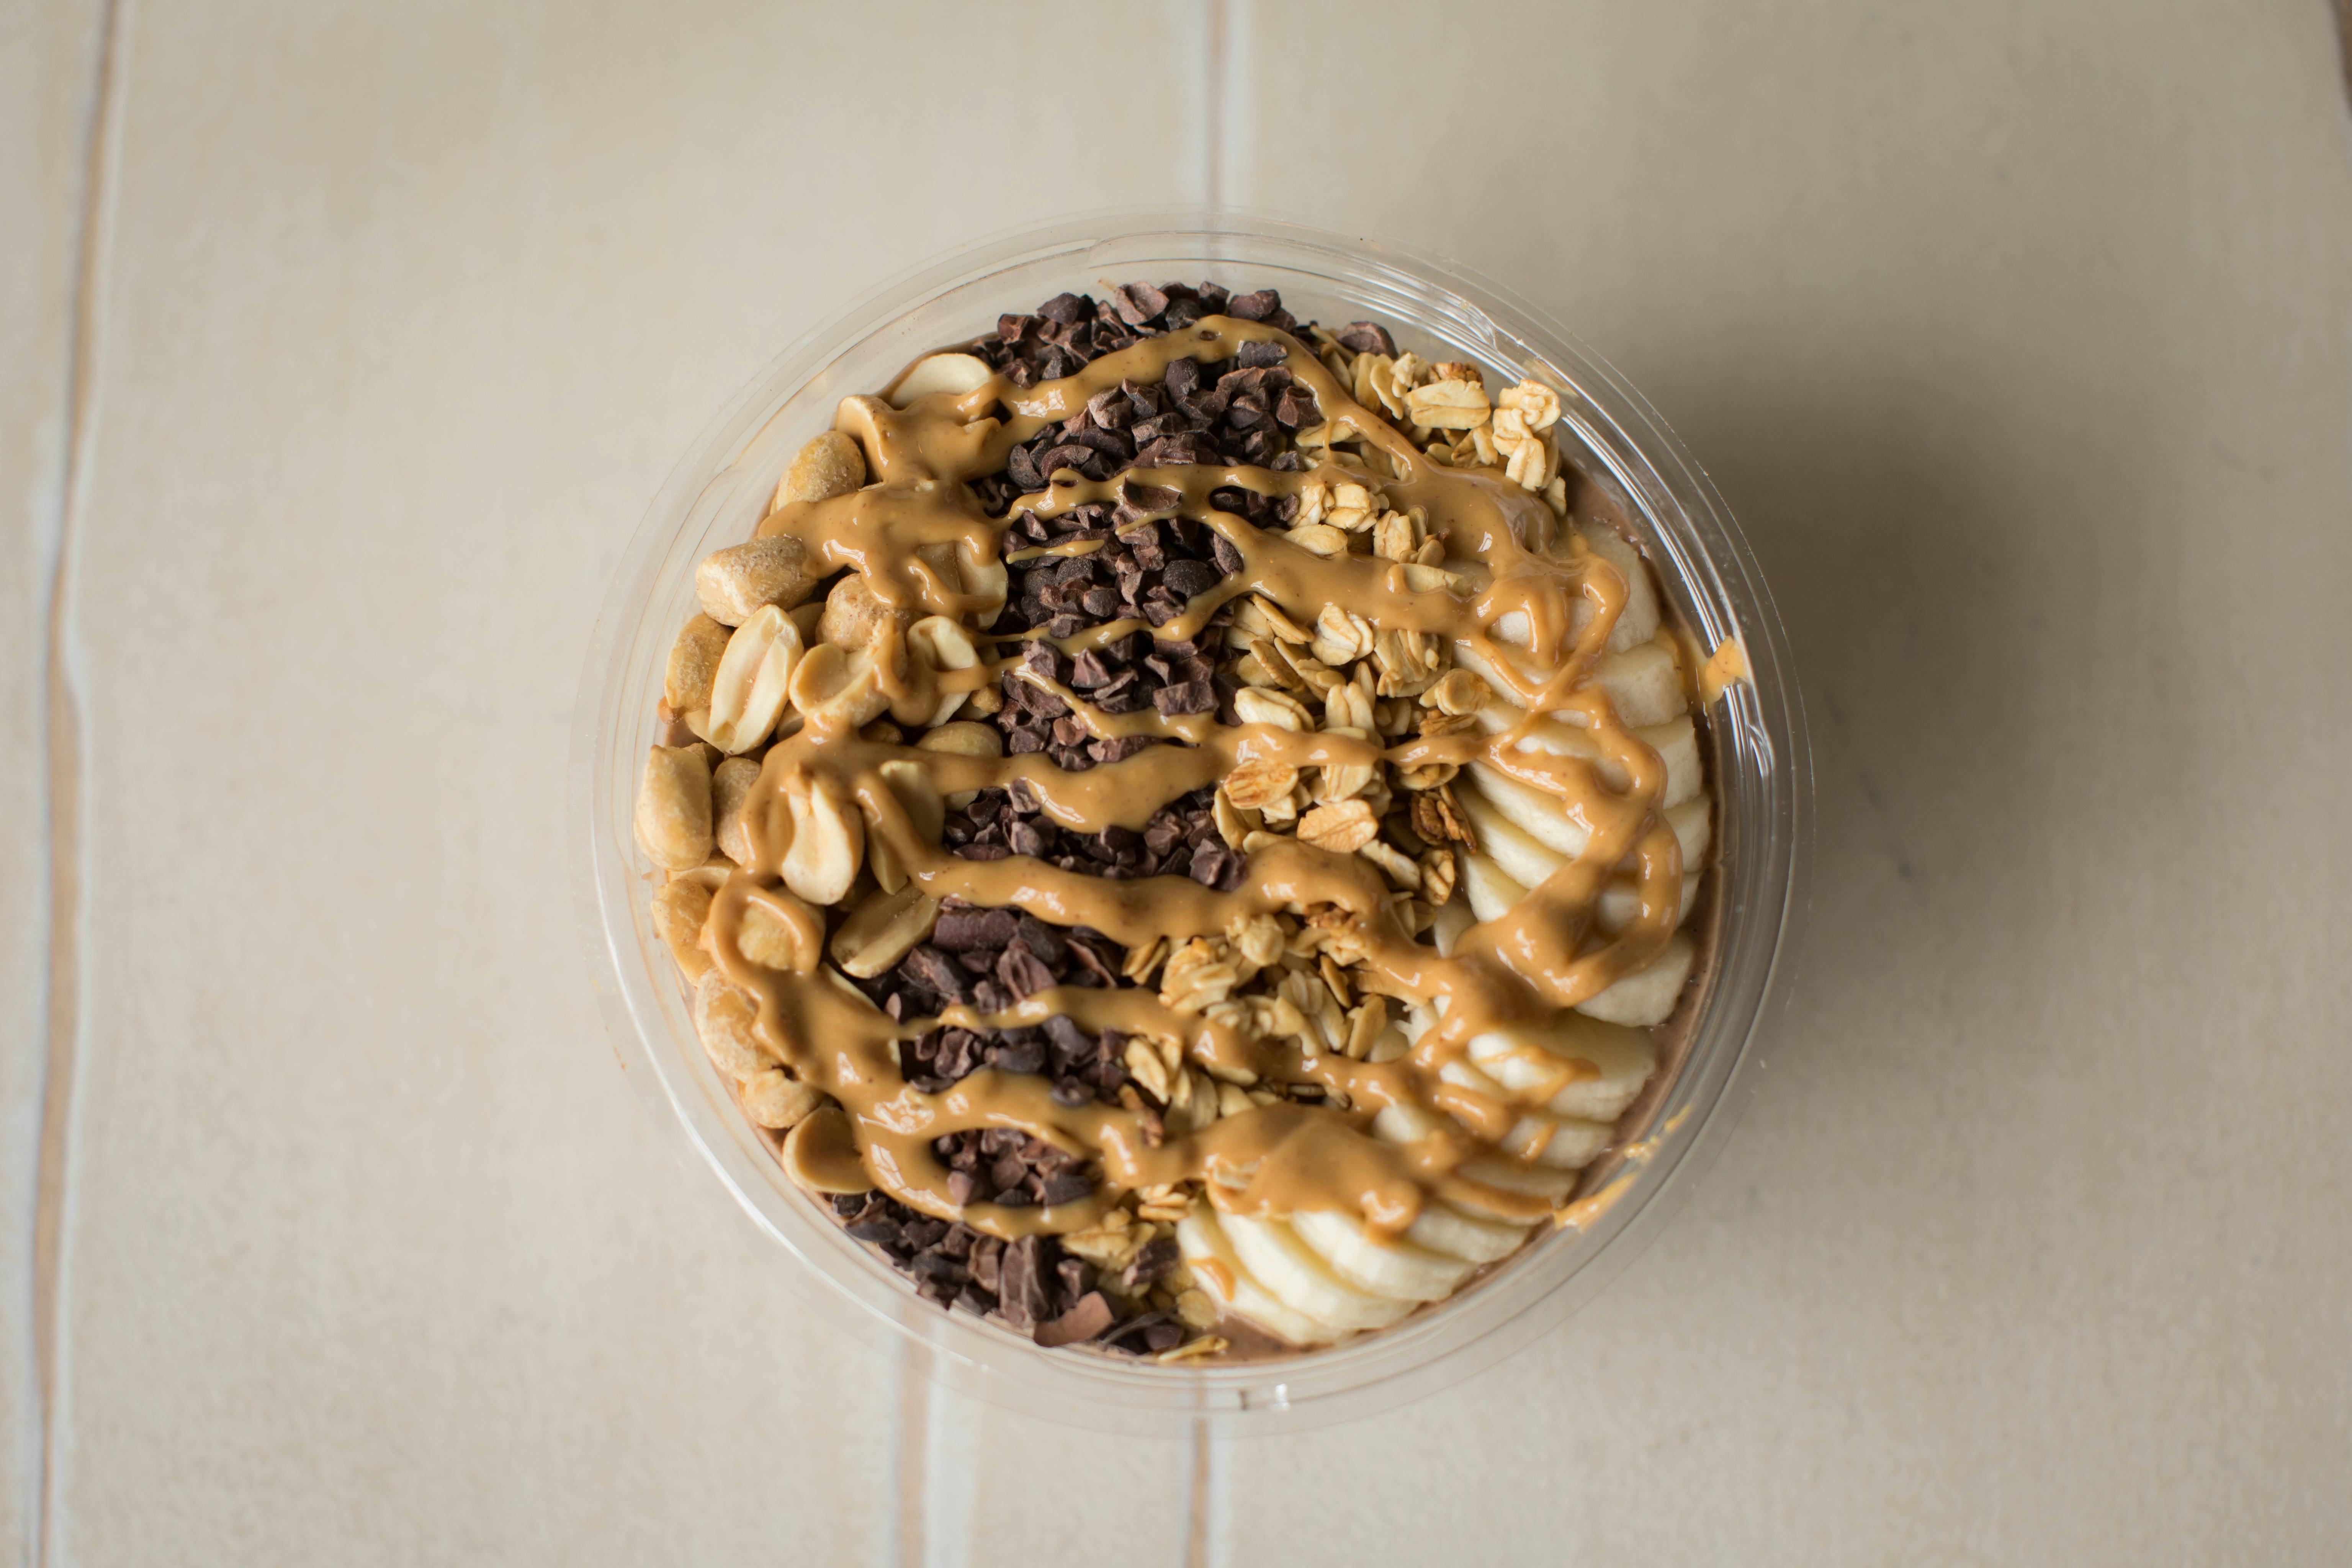 "Bean"ut Butter Bomb Smoothie Bowl from Dirt Juicery - Bay Park Square in Green Bay, WI